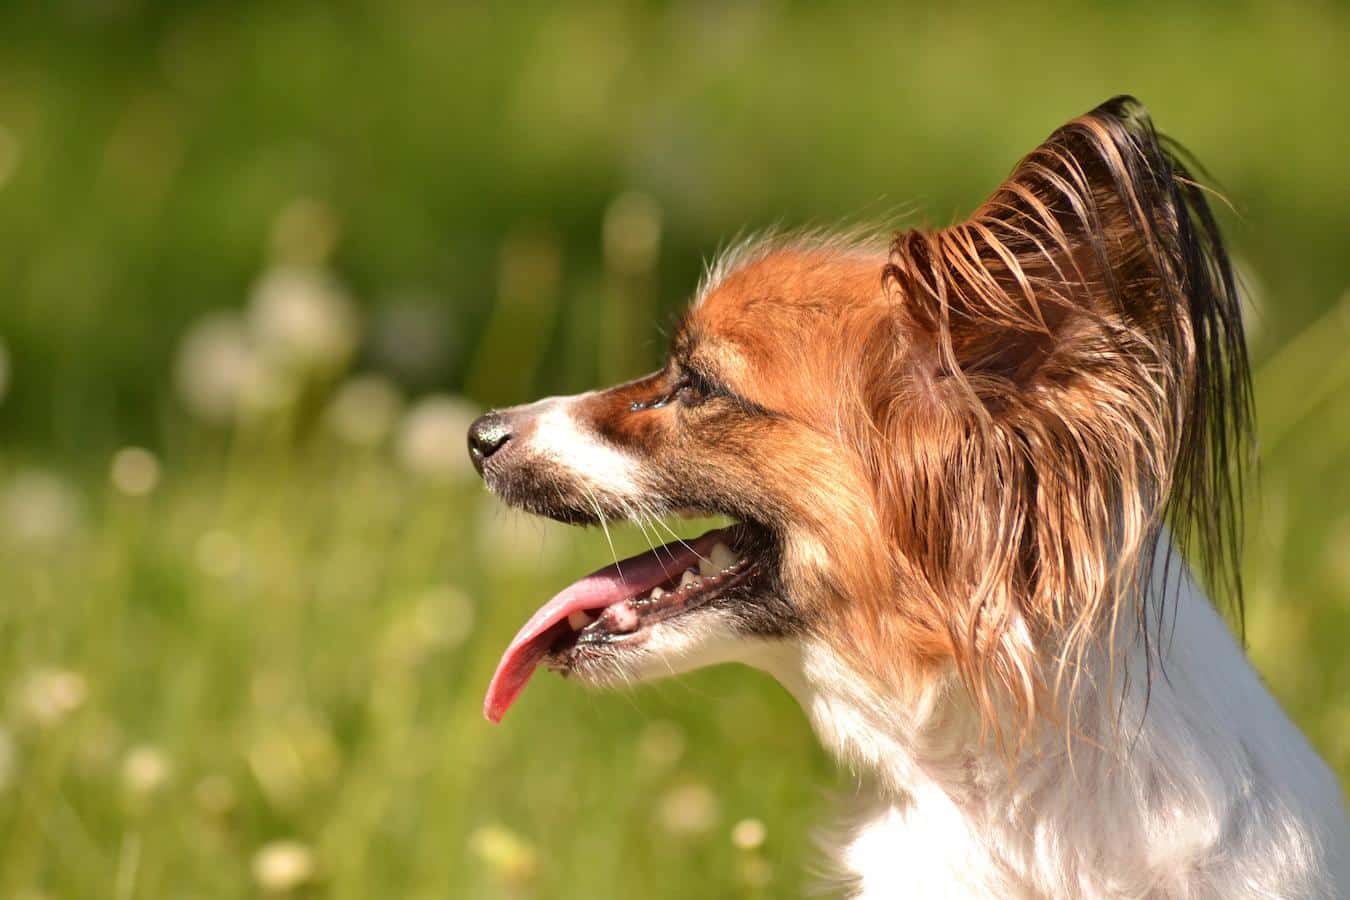 a dog panting outside laryngeal paralysis cushing's disease dog's adrenal glands produce laryngeal paralysis certified dog behaviorist upper respiratory tract developing breathing issues red blood cells constitute medical advice short nosed breeds